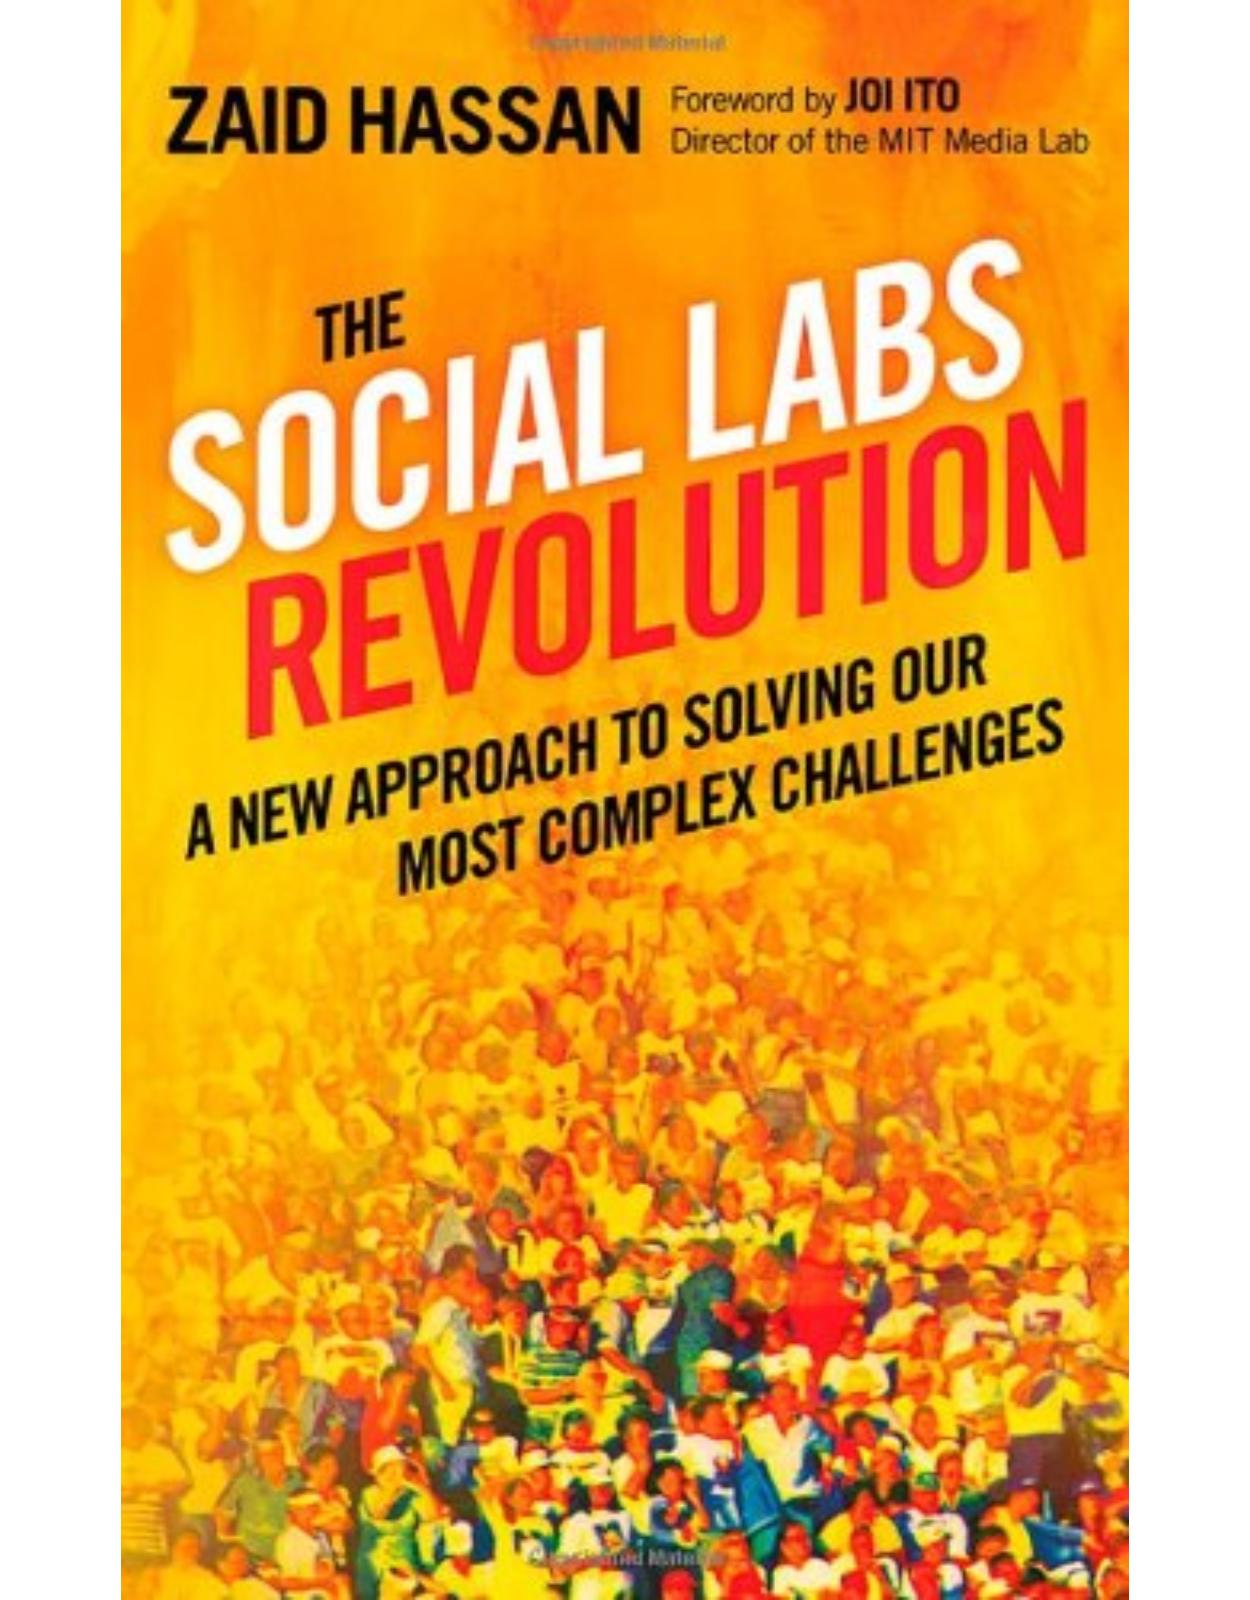 The Social Labs Revolution: A New Approach to Solving our Most Complex Challenges